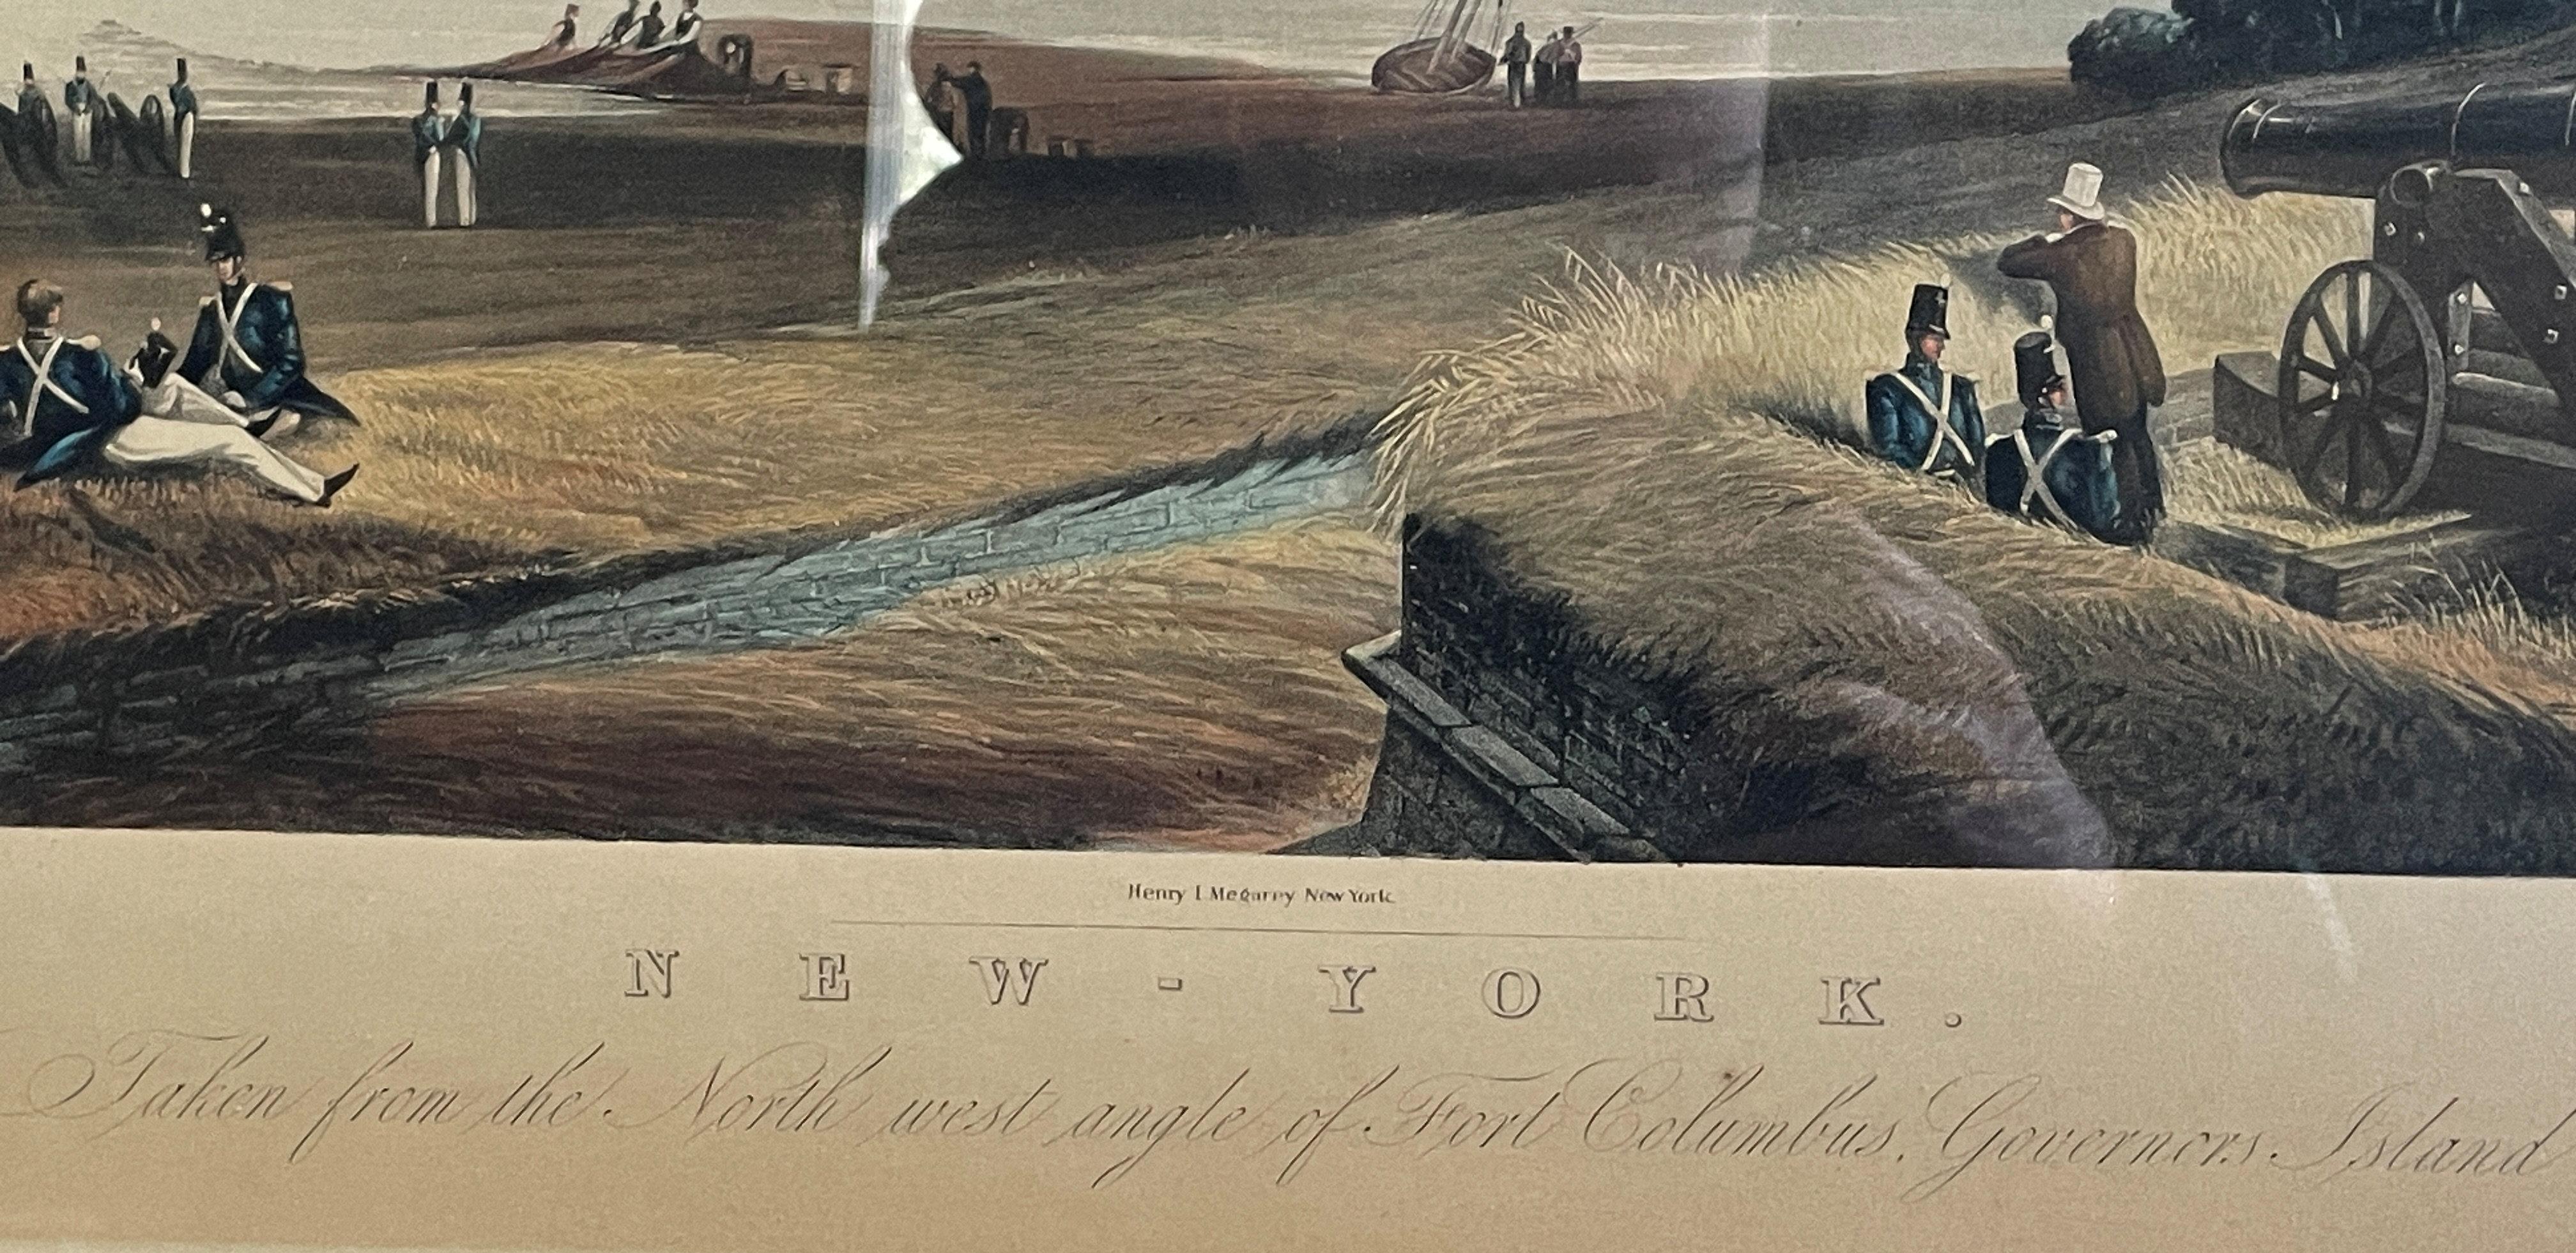 New York - Taken from the north west angle of Fort Columbus Governor's Island, 1846
Engraved by Henry Papprill after a sketch by F. Catherwood, published by Henry J. Megarey
Hand-colored engraving on paper
Image 16 x 26 1/2 inches

Henry A. Papprill